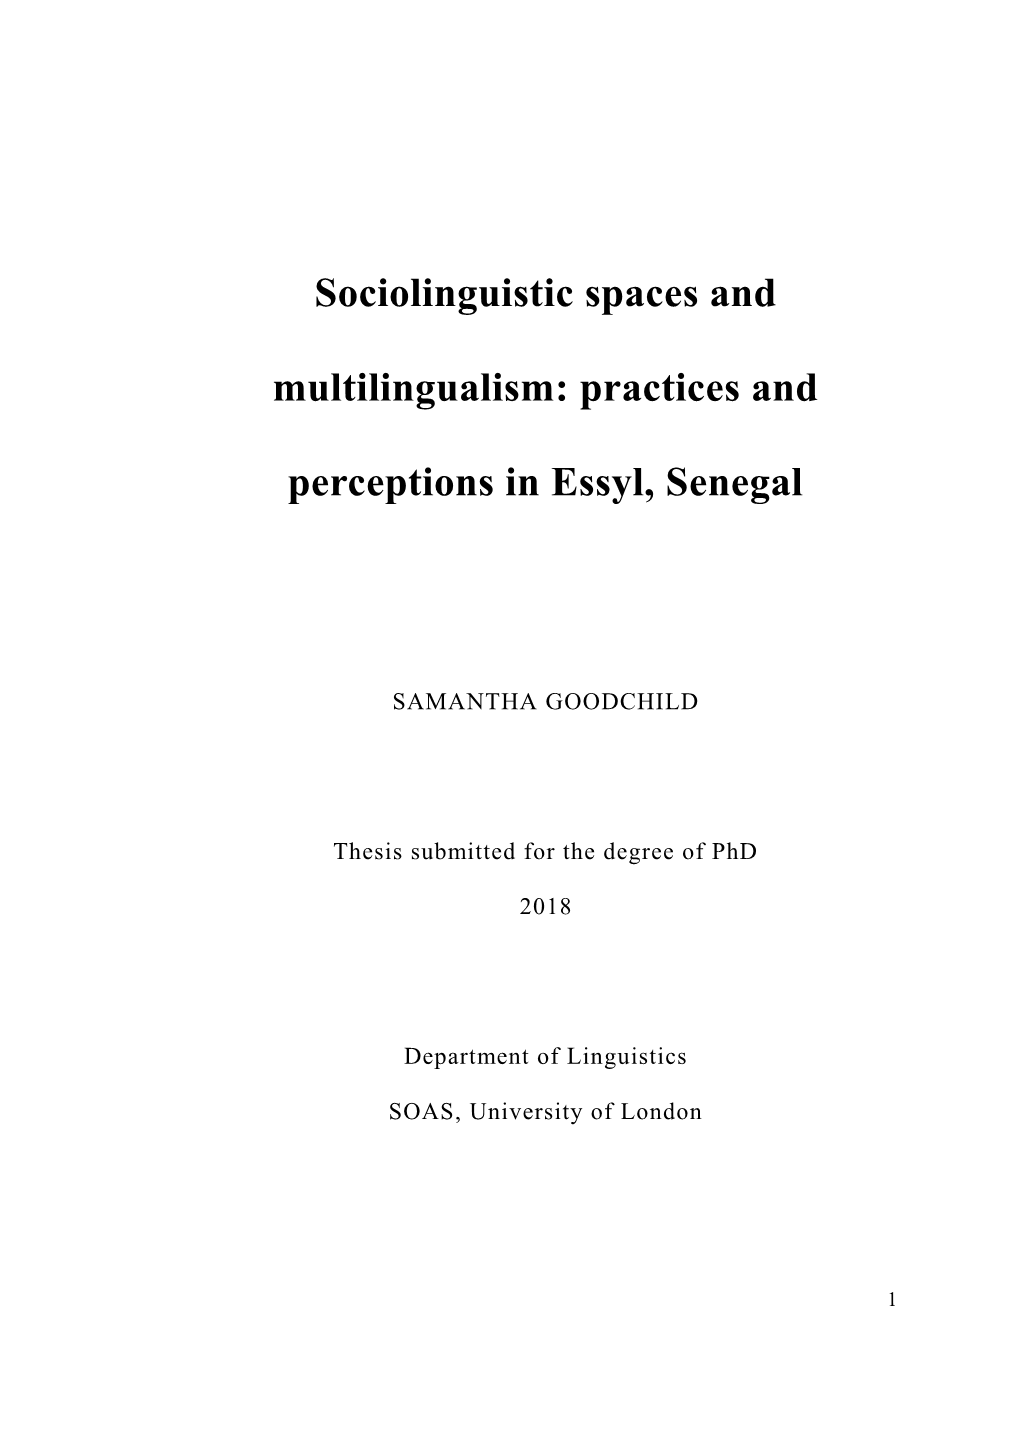 Sociolinguistic Spaces and Multilingualism: Practices And